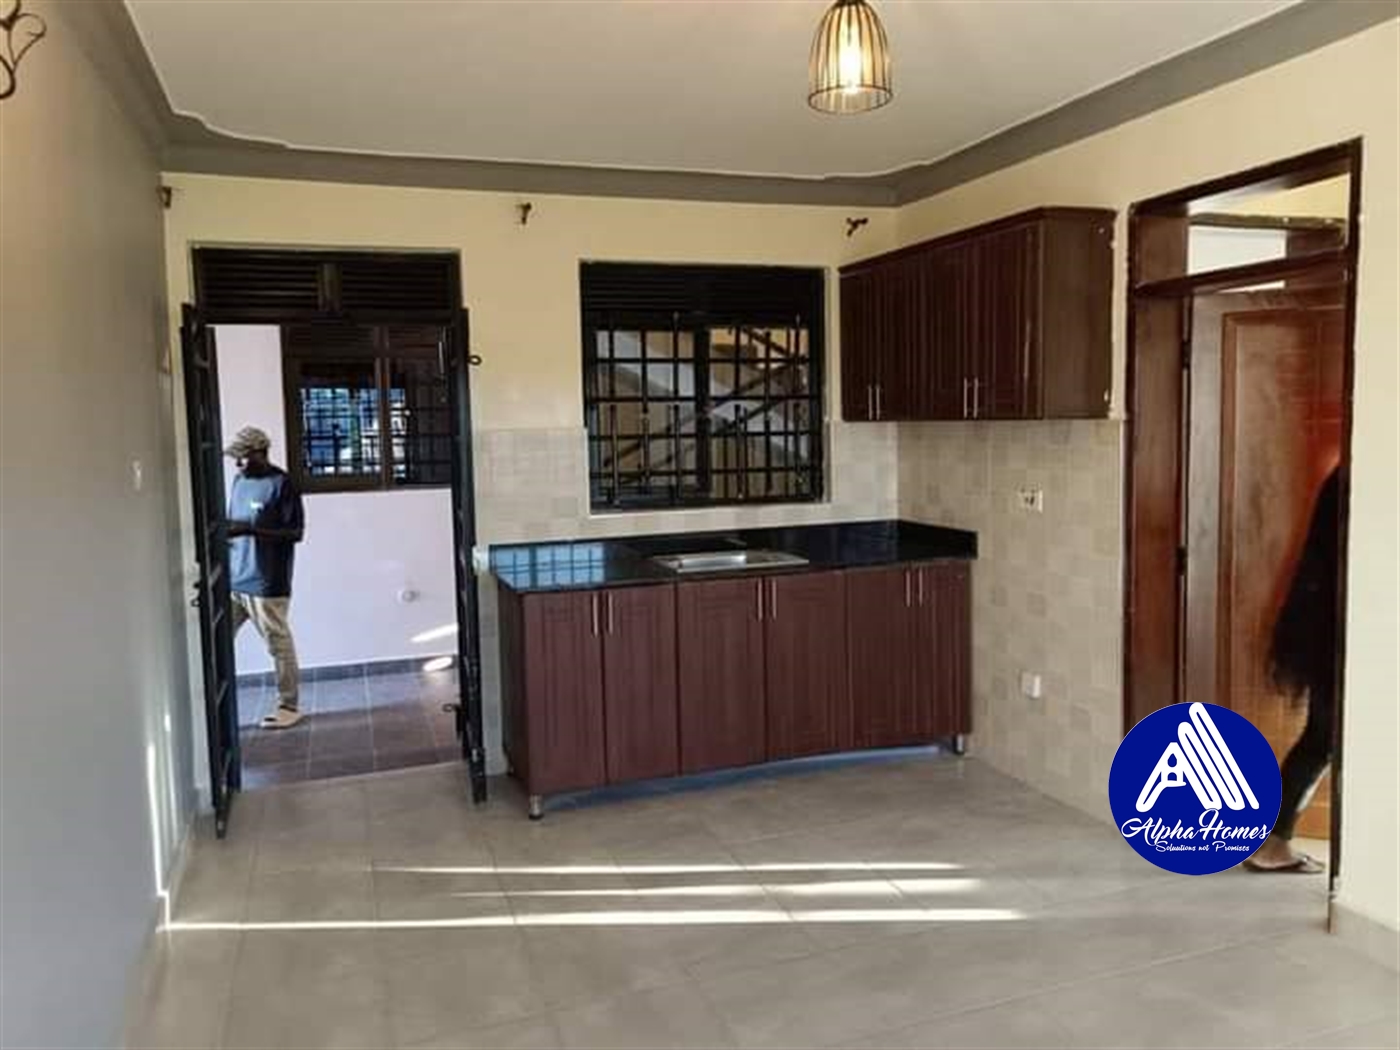 Apartment for rent in Nabutti Mukono